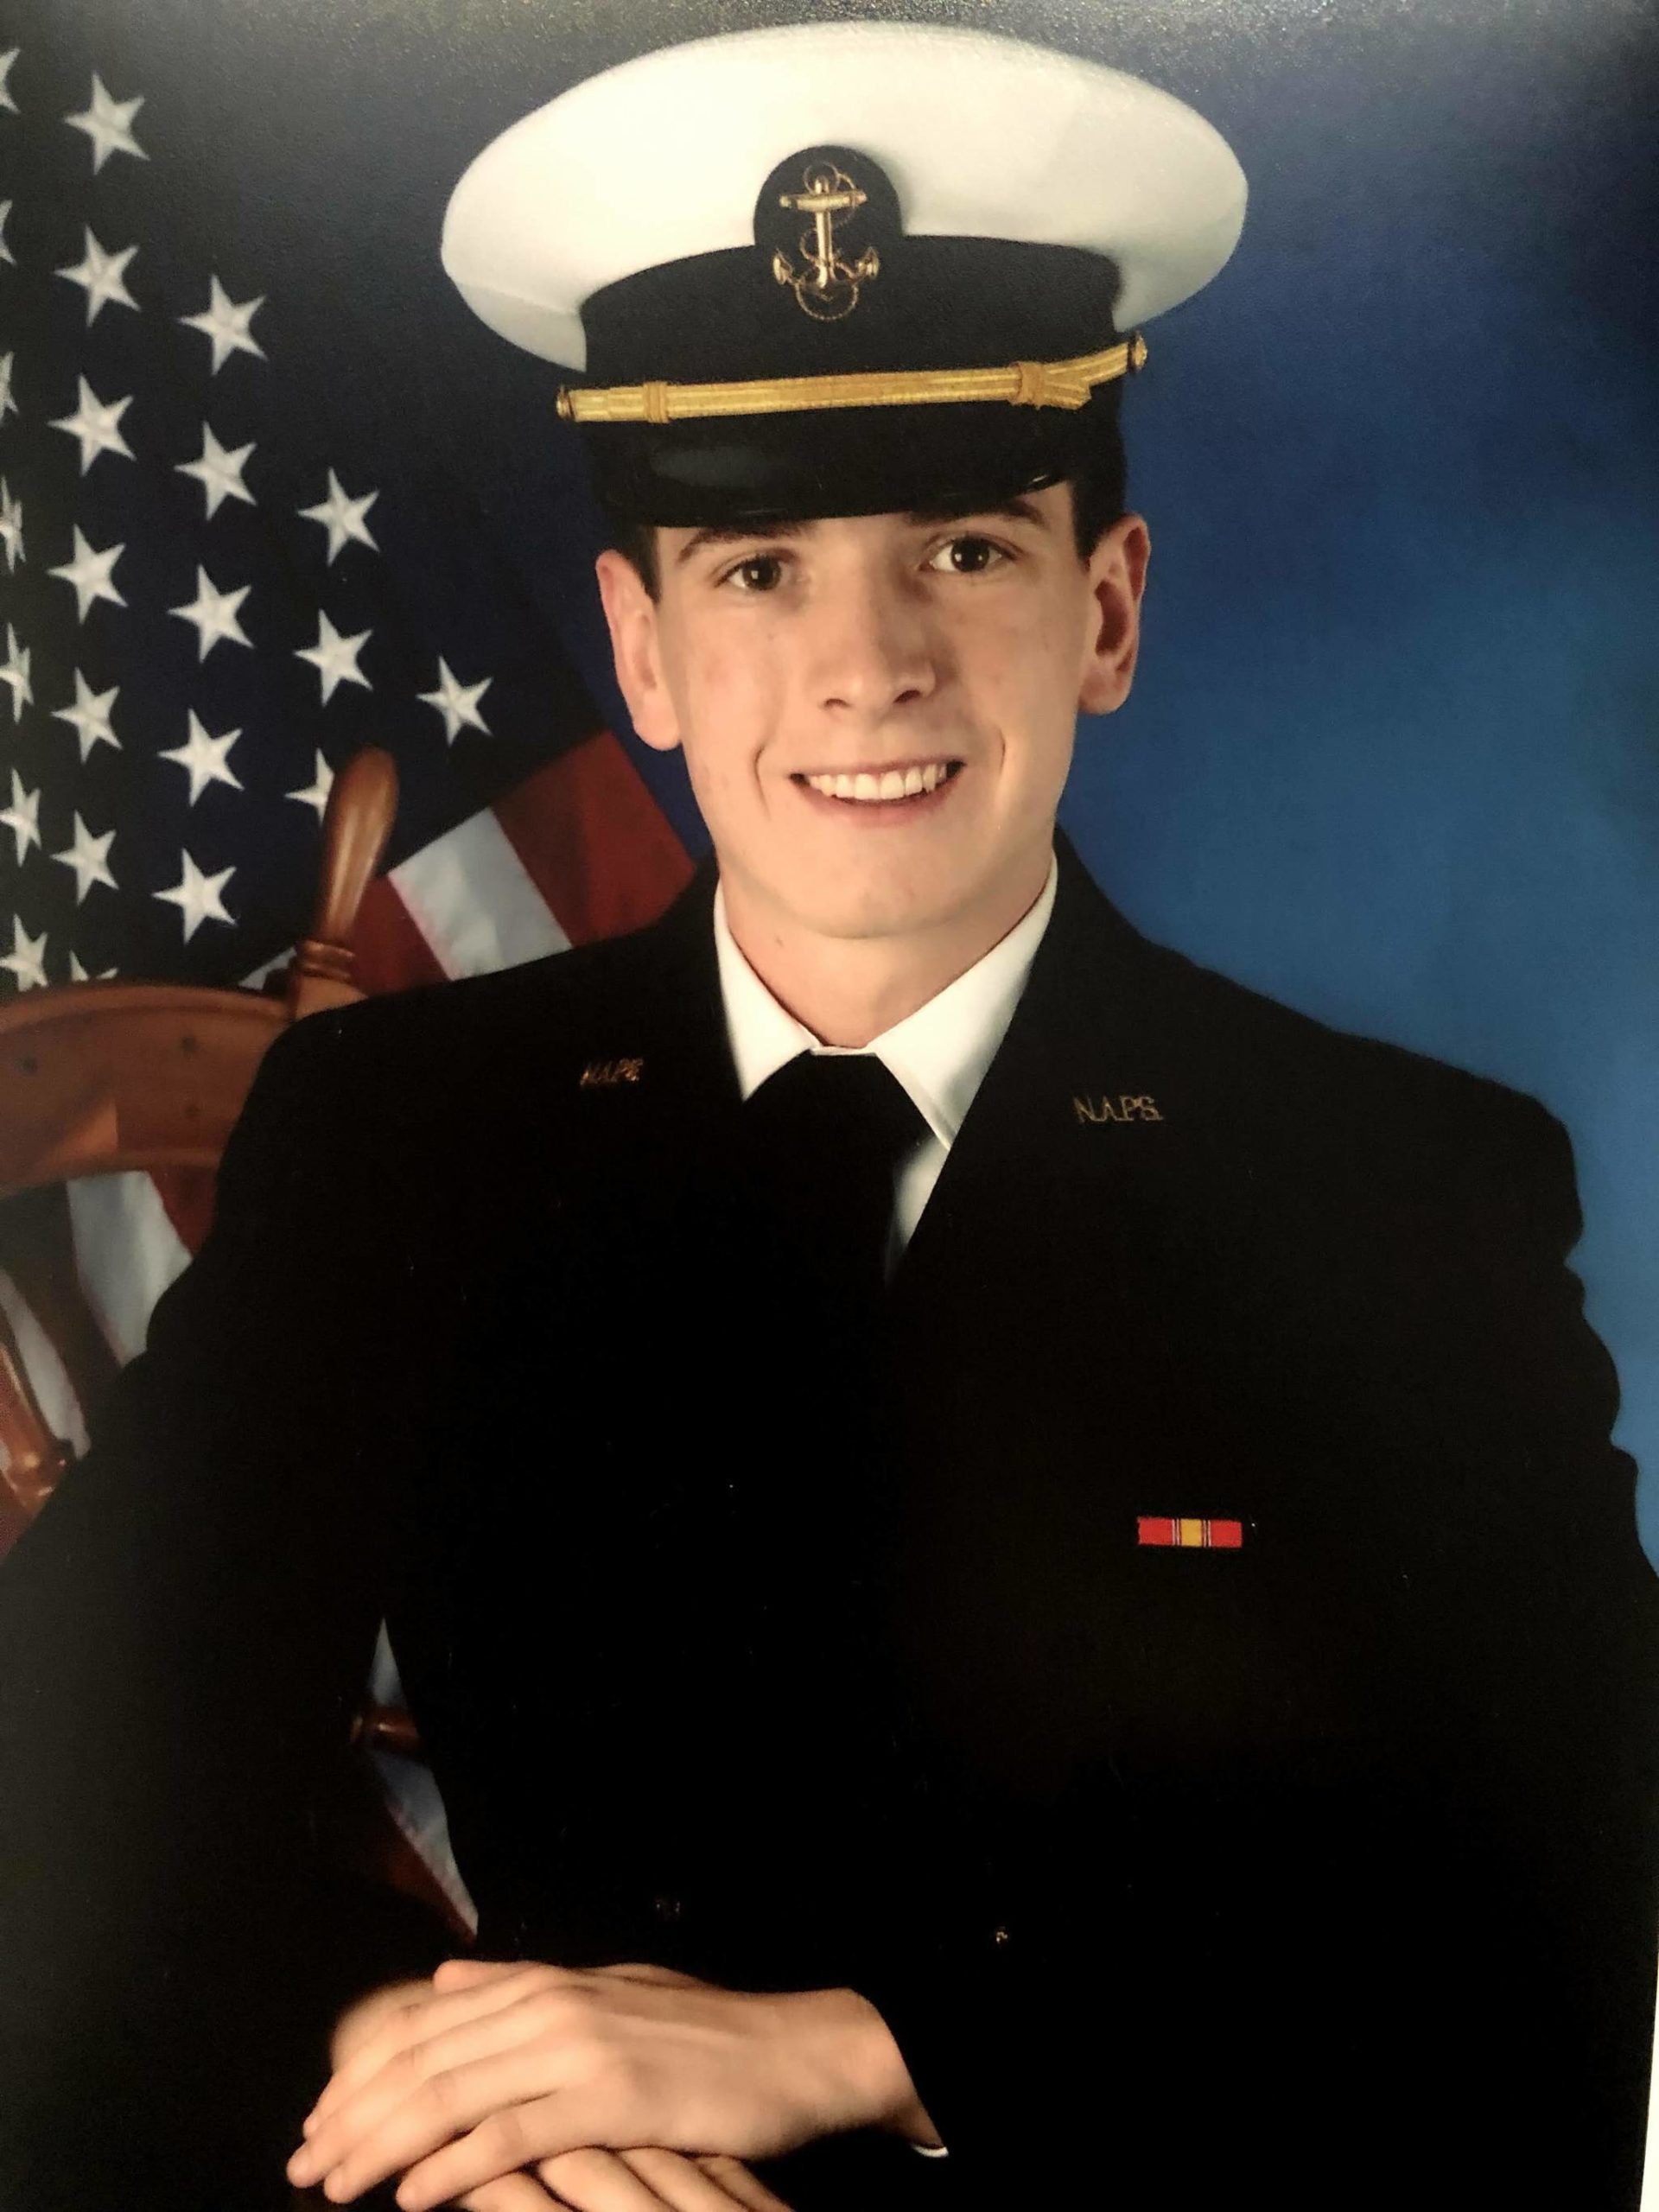 CONTRIBUTED PHOTO/Young Midshipman Kirsch